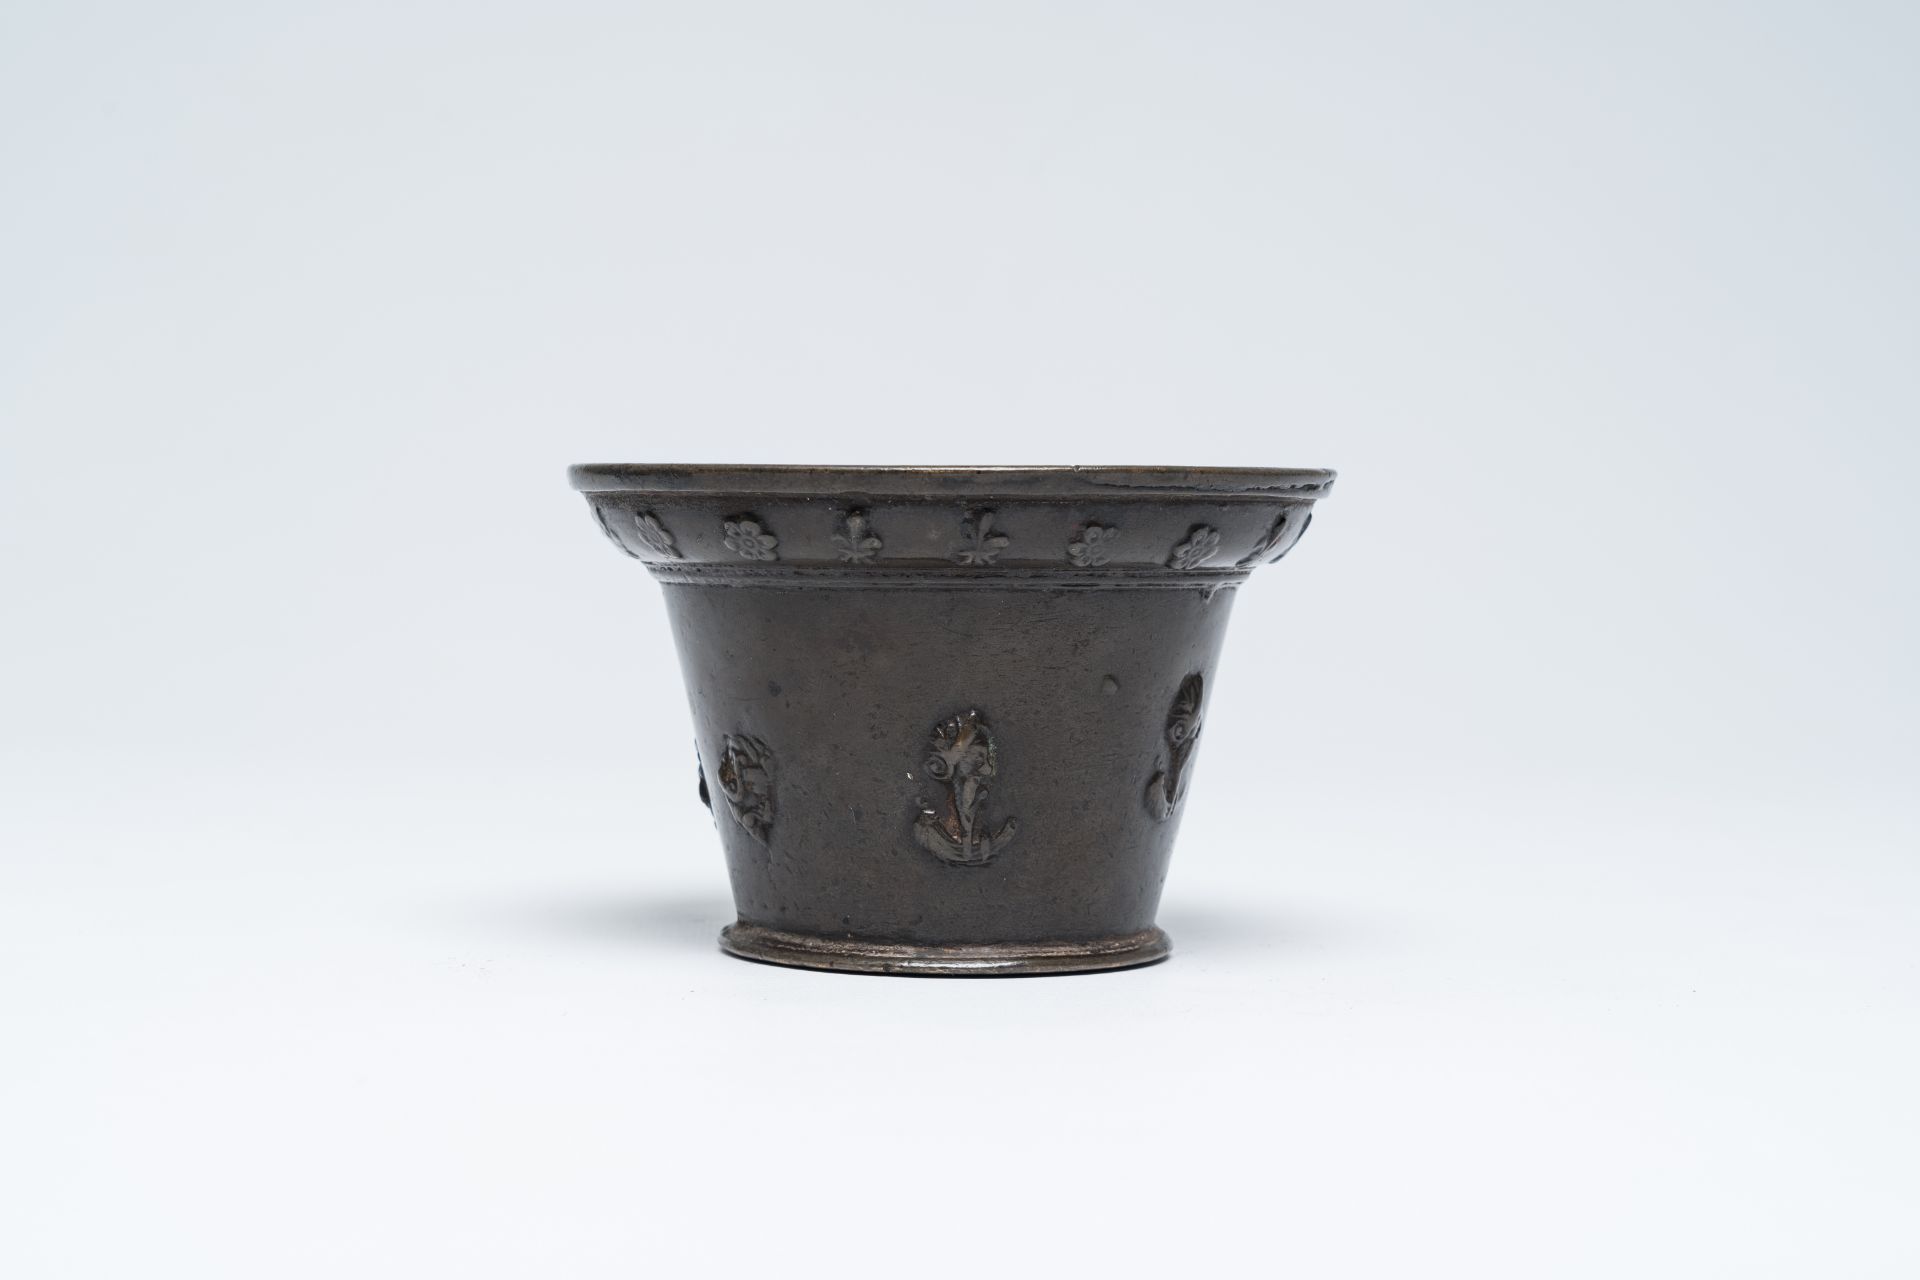 A French bronze 'mascarons' mortar, probably Lyon, 17th C. - Image 5 of 7